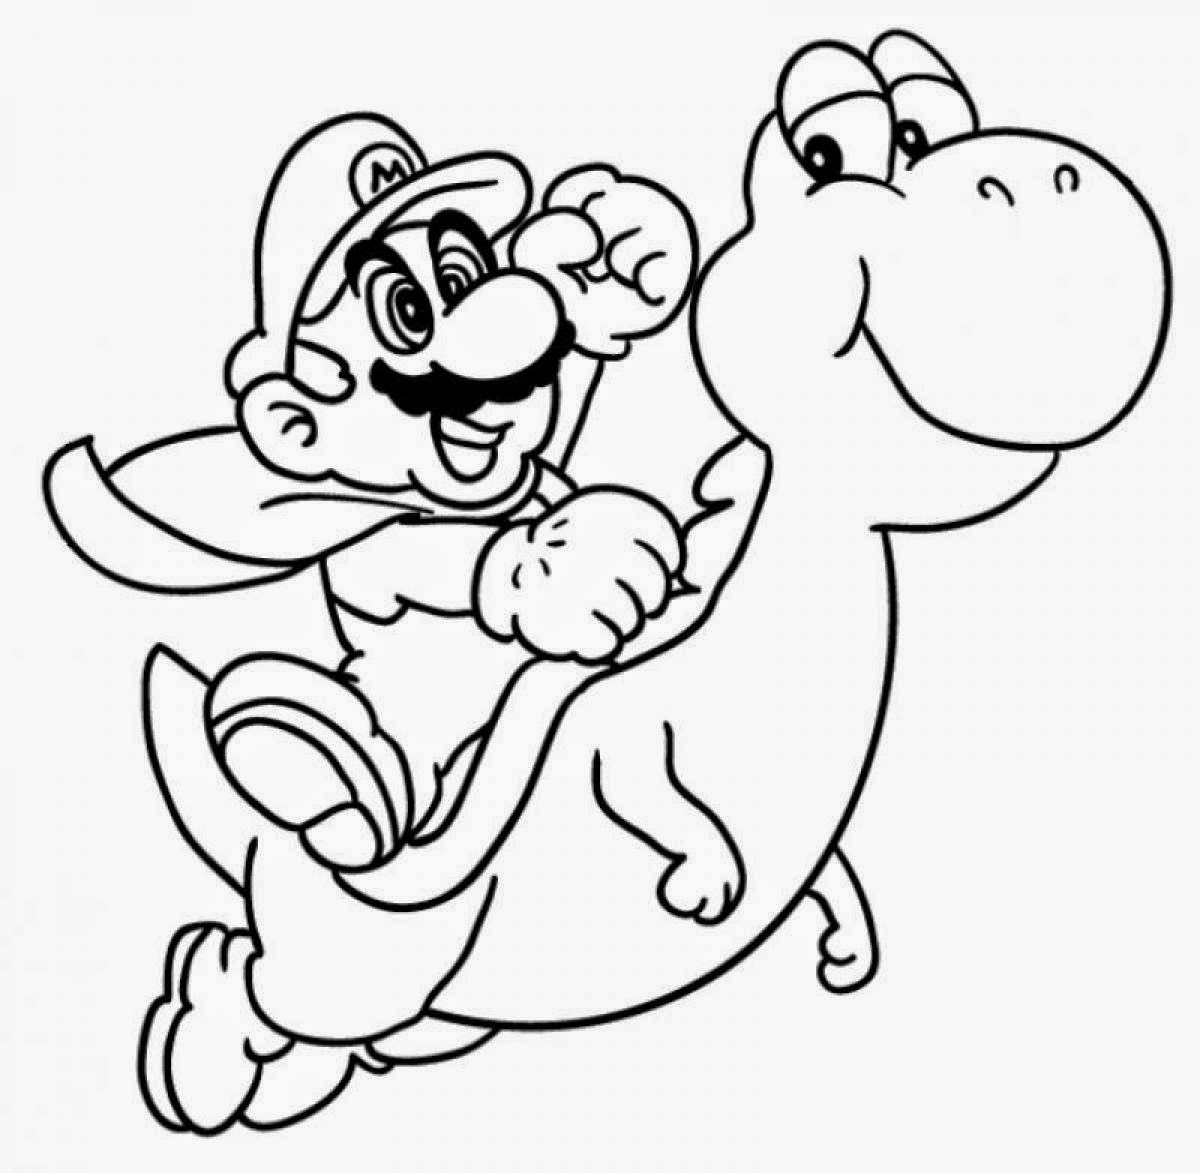 Coloring page: Super Mario Bros (Video Games) #153719 - Free Printable Coloring Pages